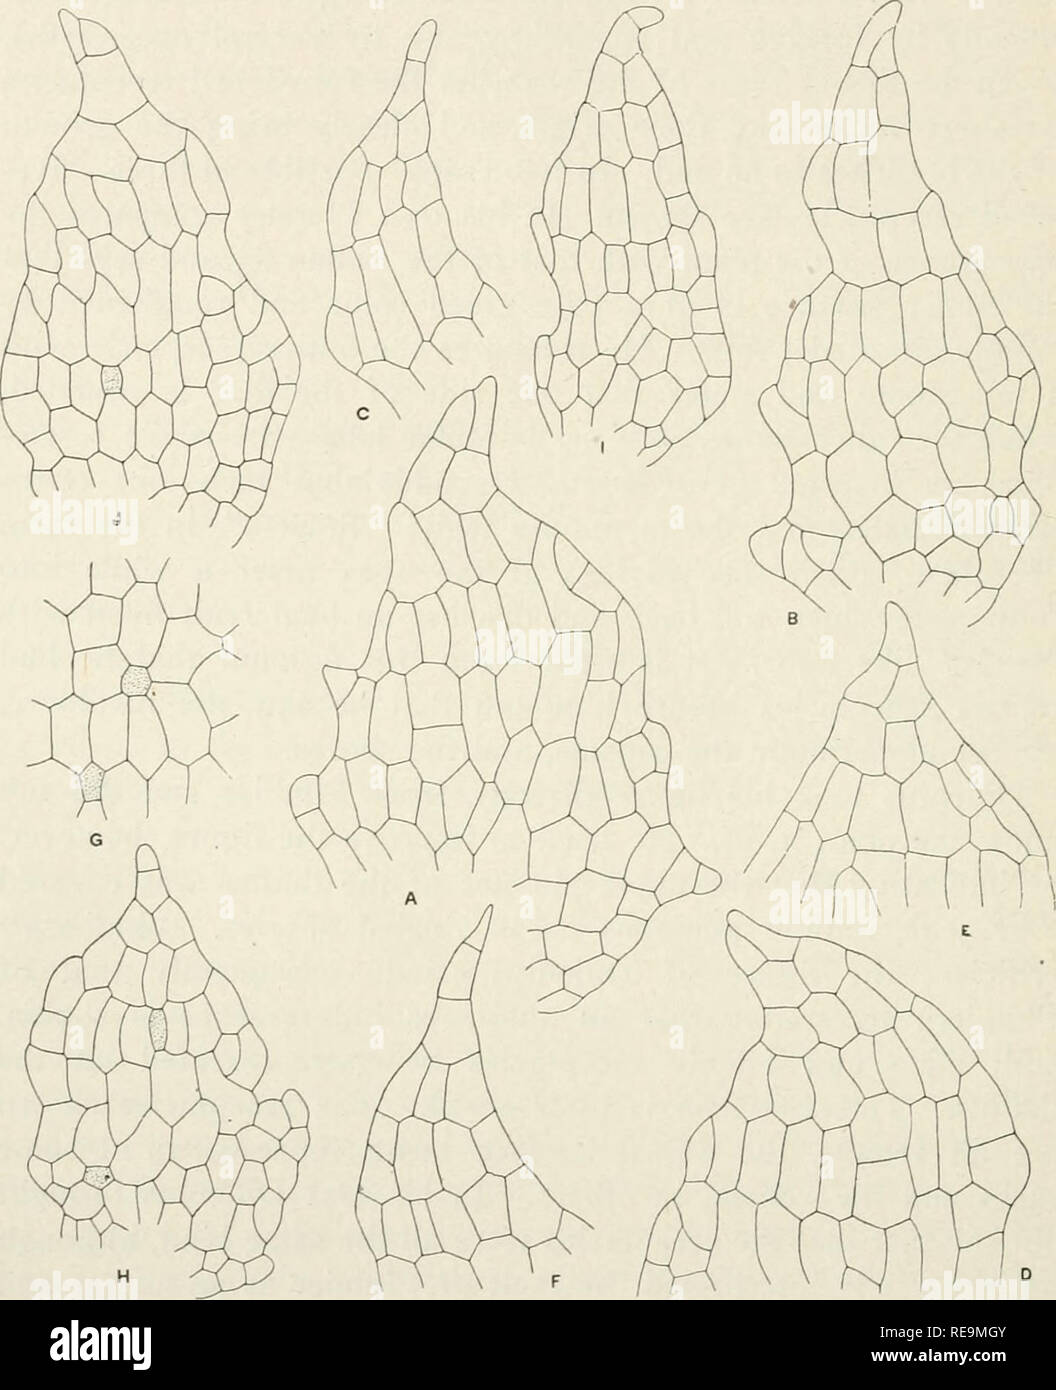 . Contributions from the Osborn Botanical Laboratory. Plants. 298 Alexander W. Evans, cJienopoda refers to the female receptacle, and it has already been pointed out that a quadritid female receptacle is not found. Fig. 16. AIarchantia chEnopoda L. Appendages of ventral scales, x 100; G represents the median portion of an appendage with two cells containing oil-bodies. A-C. Cuba, C. Wright, in Hep. Cubenses. D, E. Jamaica, A. W. Evans 258. F, G. Jamaica, W. R. Maxon 403. H, I. Porto Rico, F. L. Stevens 1844; J. Guadeloupe, T. Husnot, in PI. des Antilles 796. normally in any known American spec Stock Photo